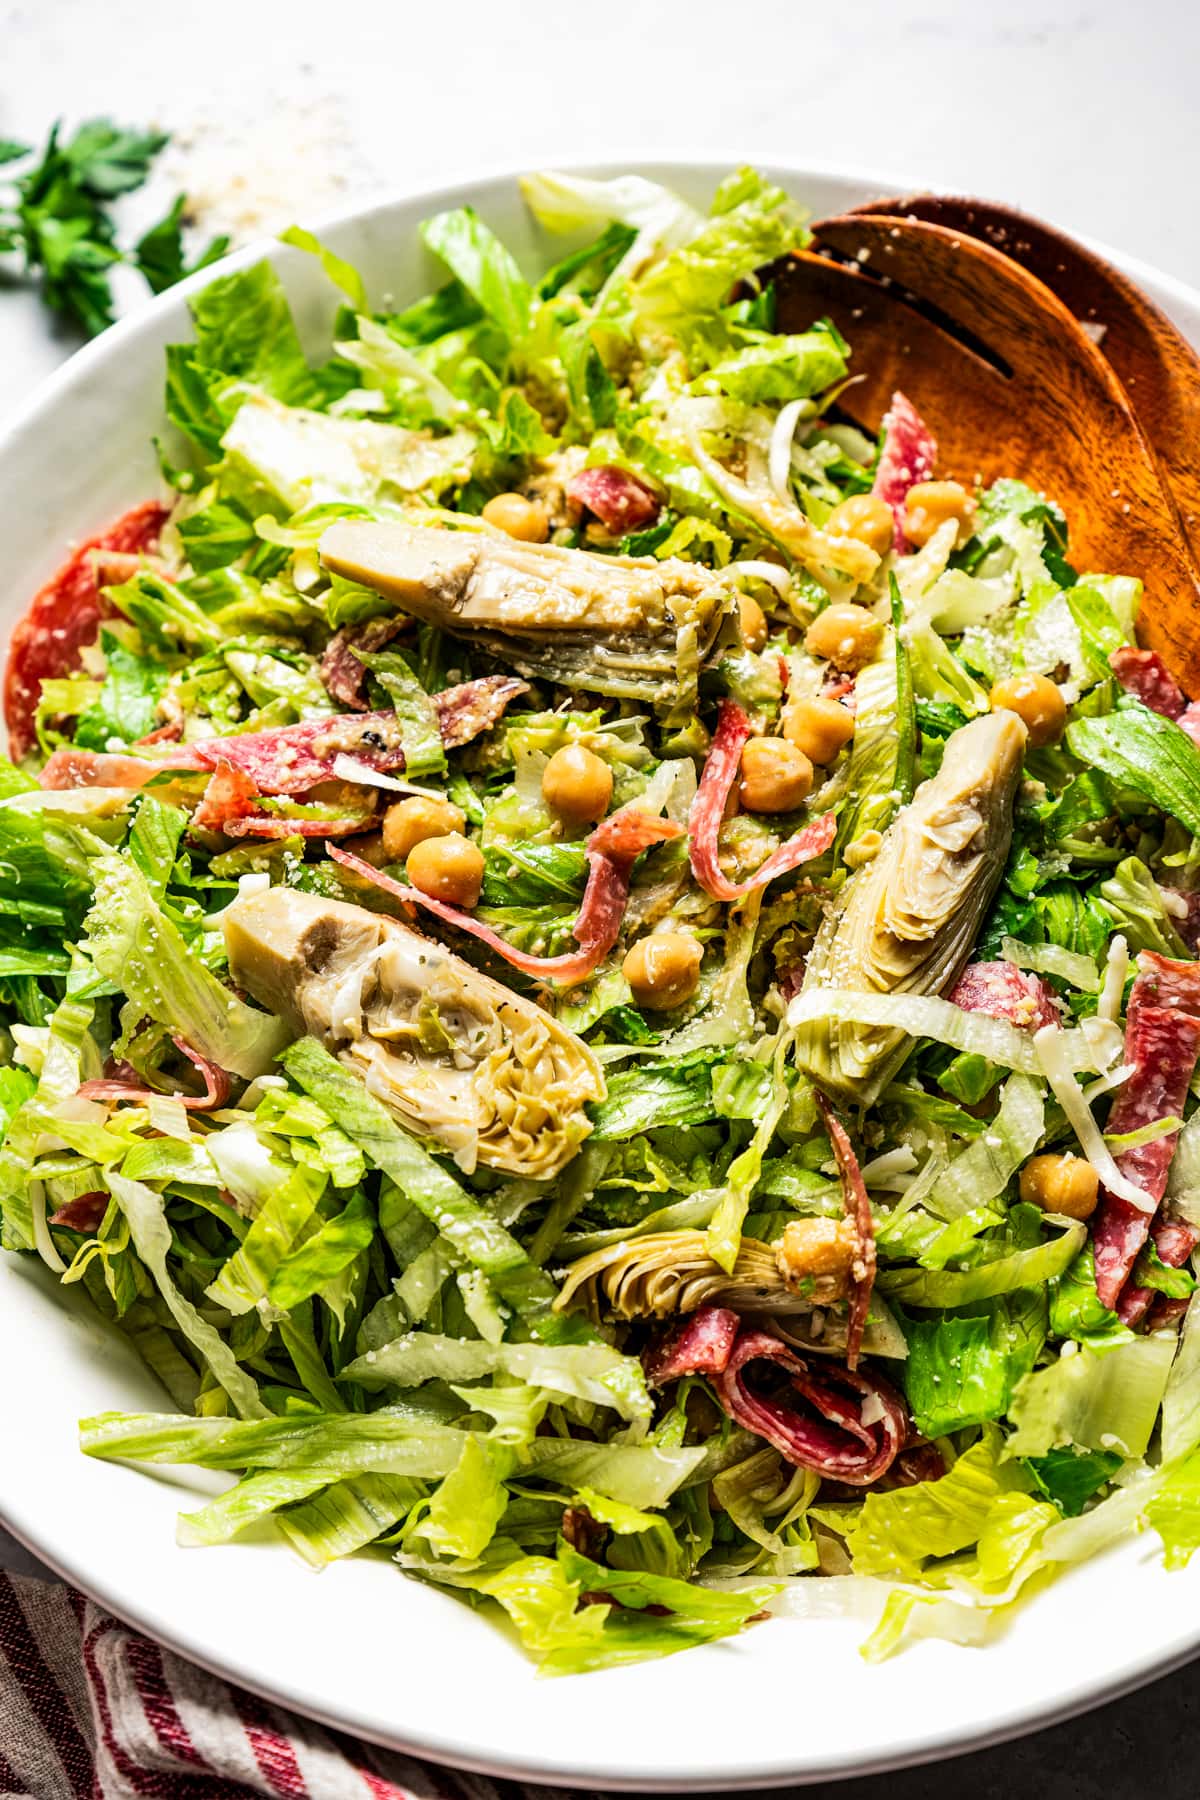 Image of La Scala chopped salad in a large bowl with sliced artichokes, salami, and chickpeas, next to two wooden serving spoons.